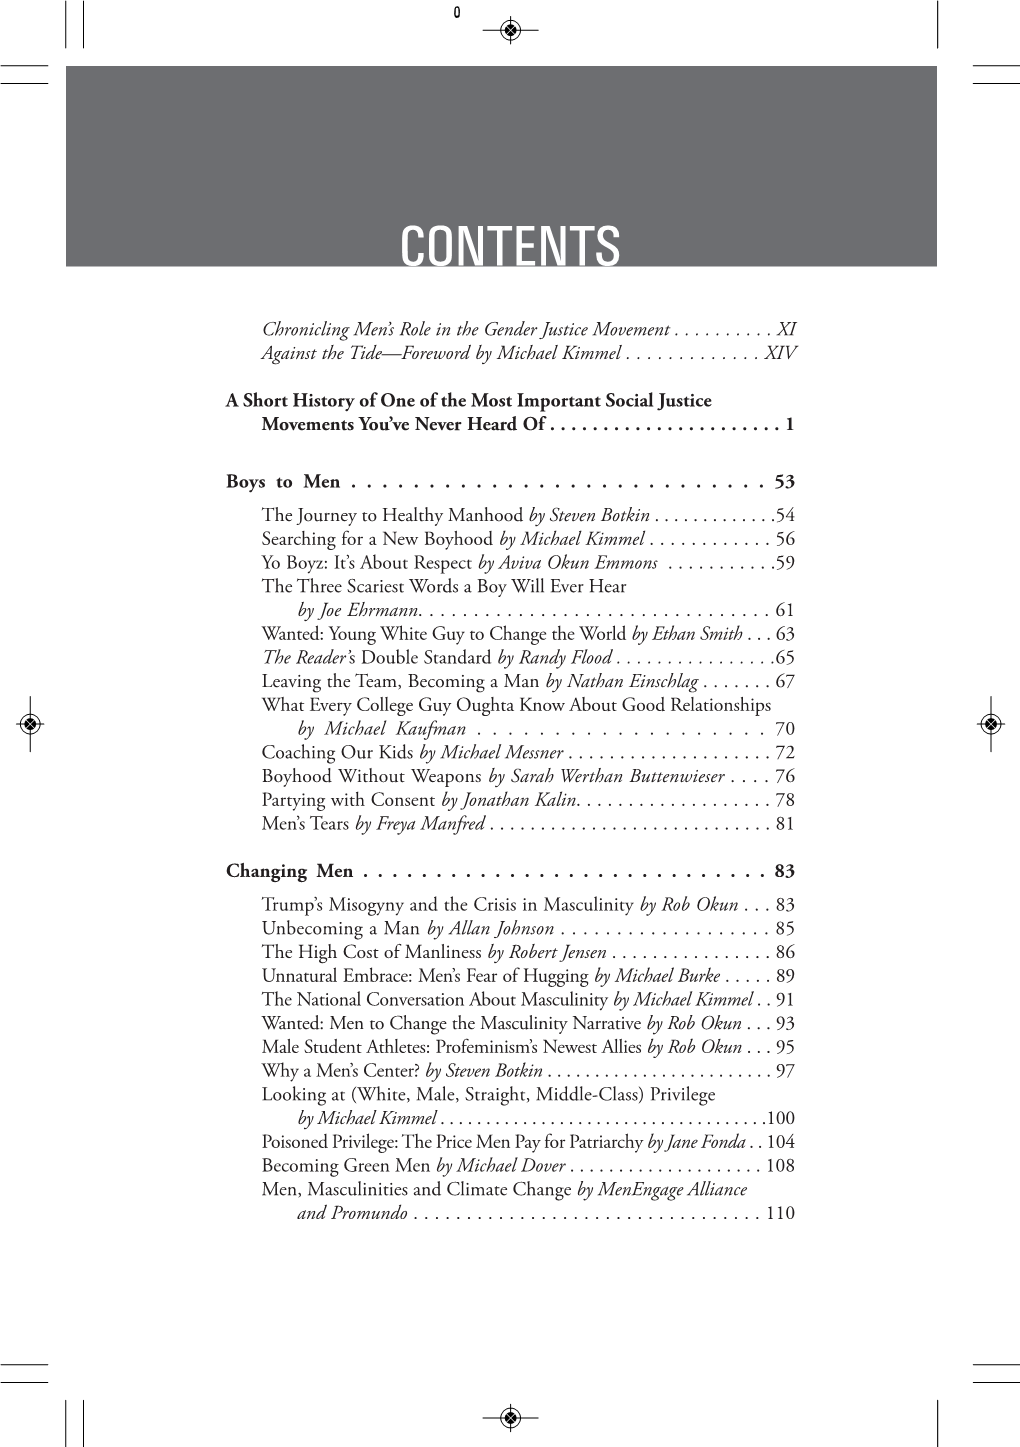 Read the Table of Contents